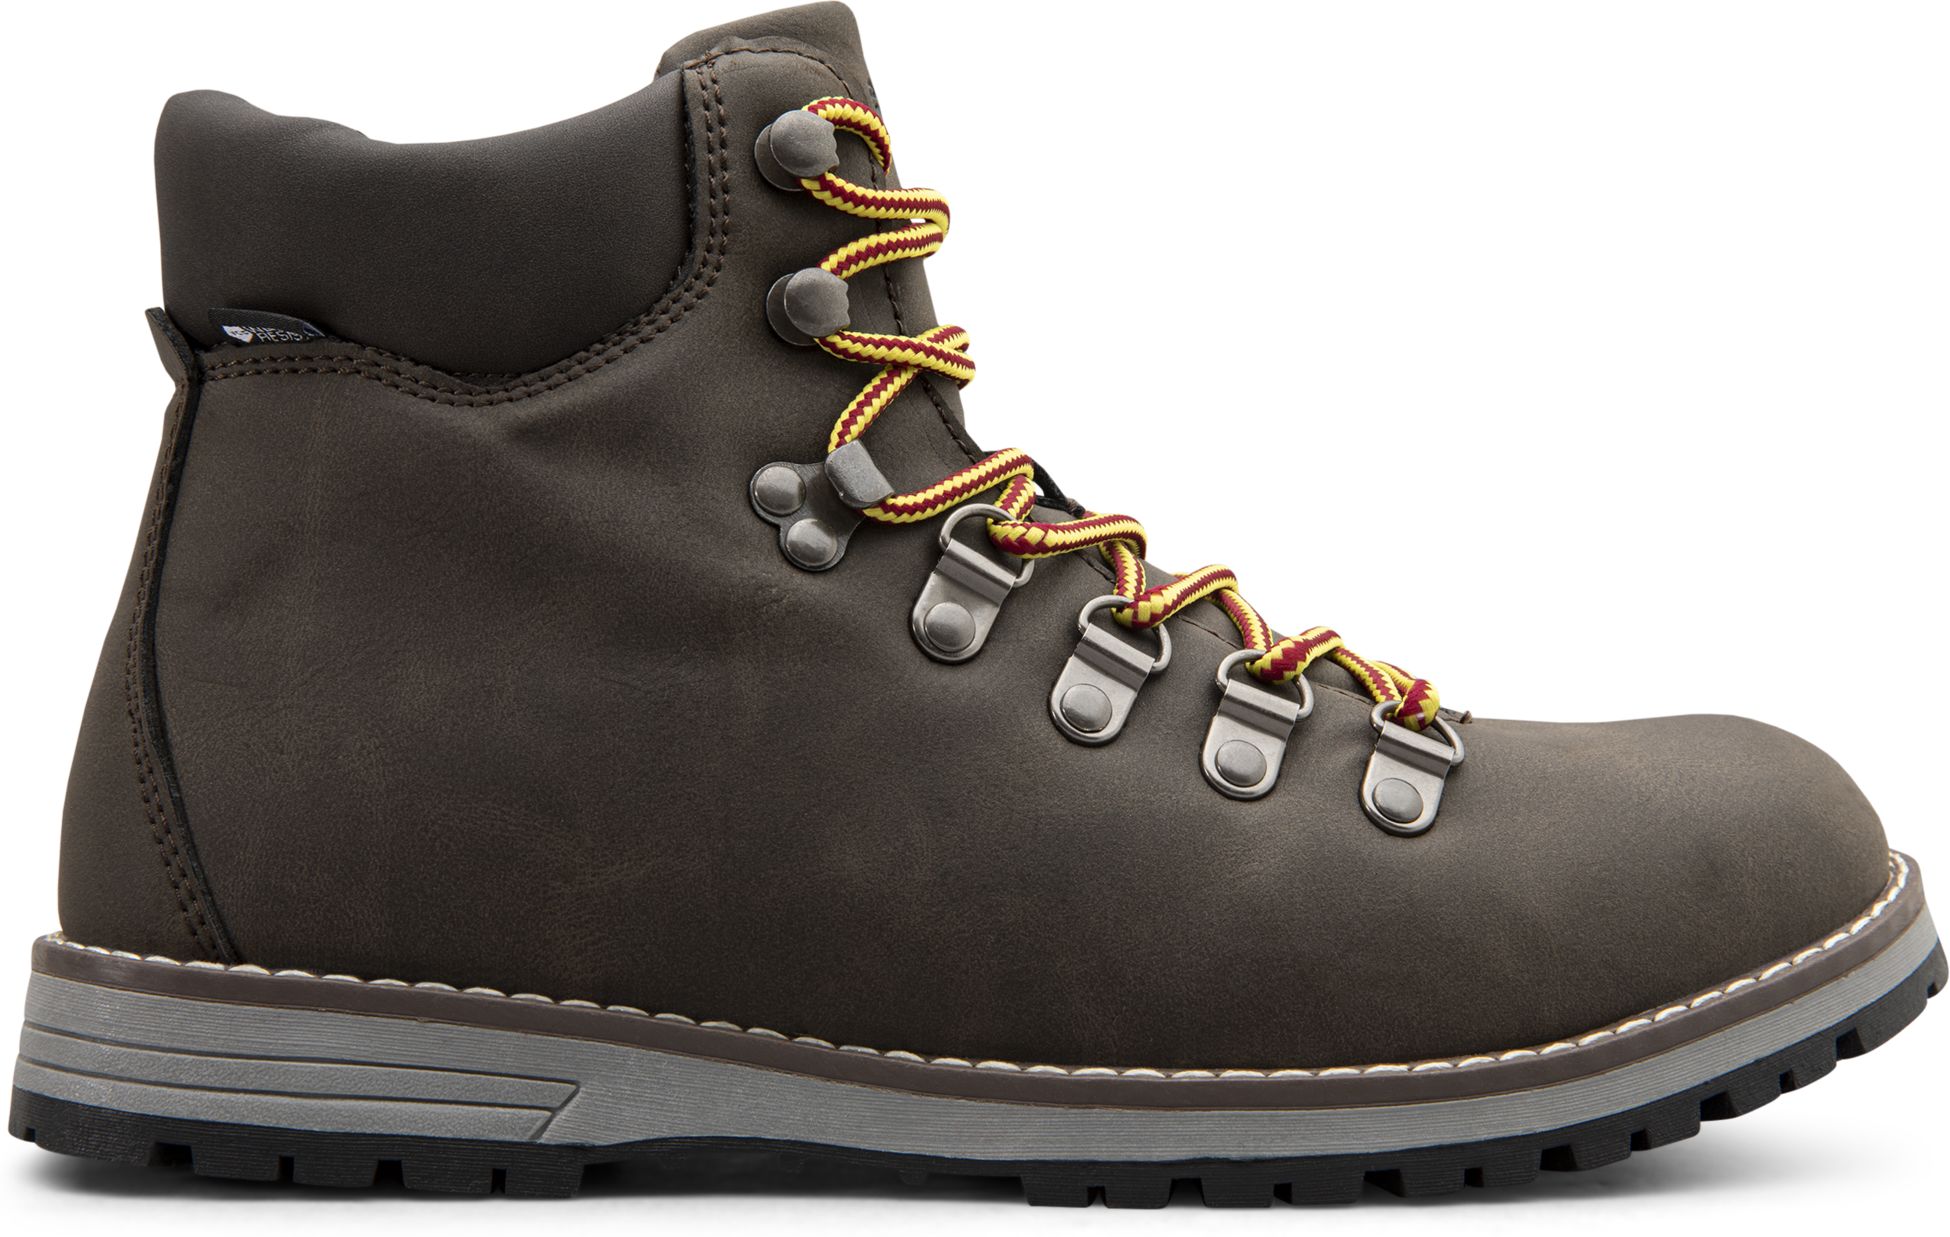 EVEREST, W STYLE HIKER BOOT